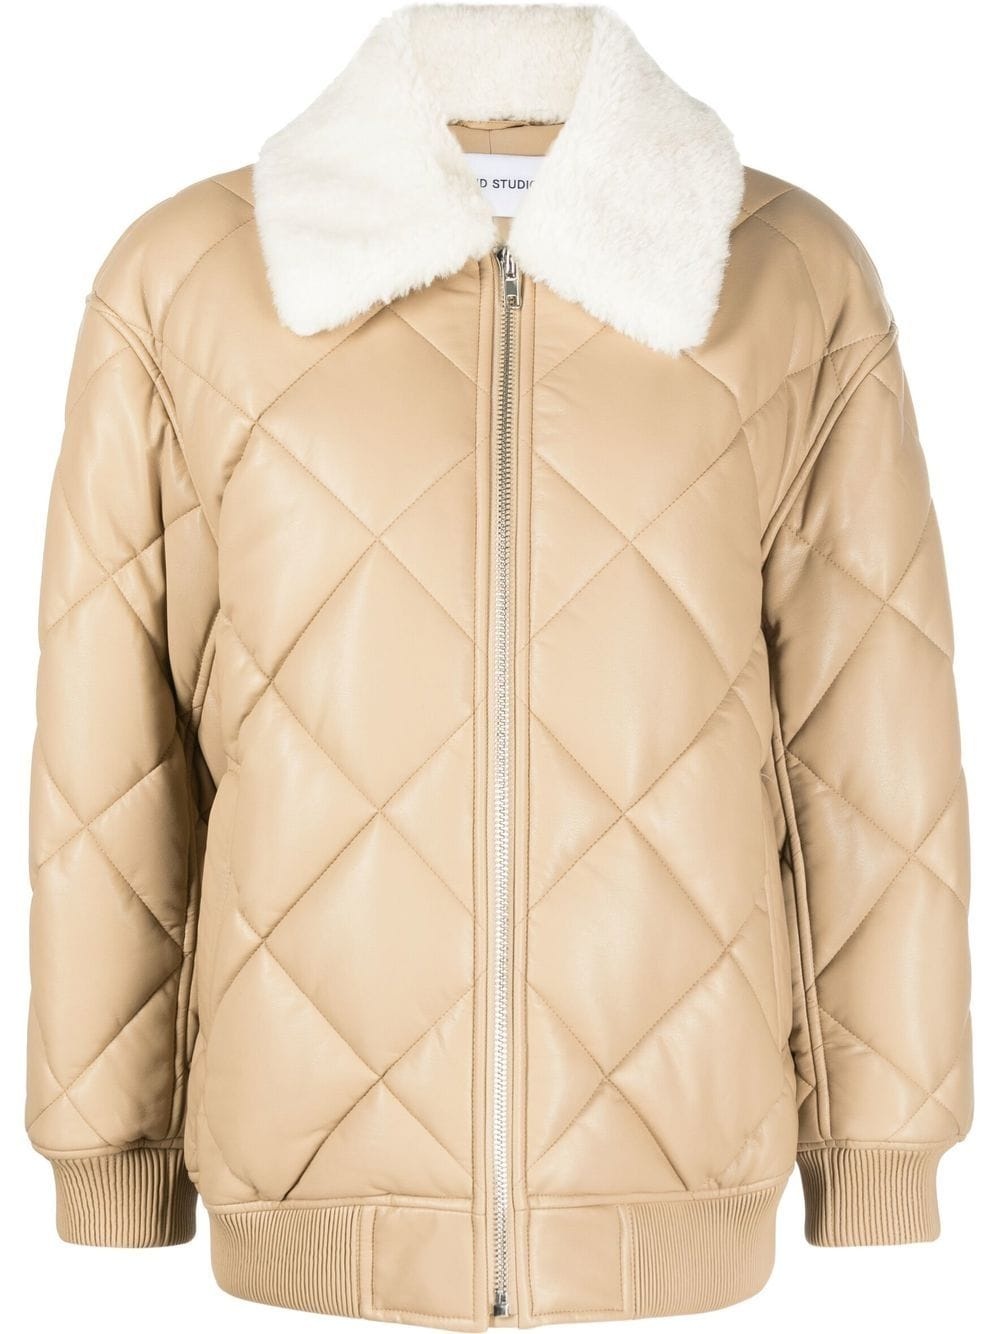 diamond-quilted faux-leather jacket - 1